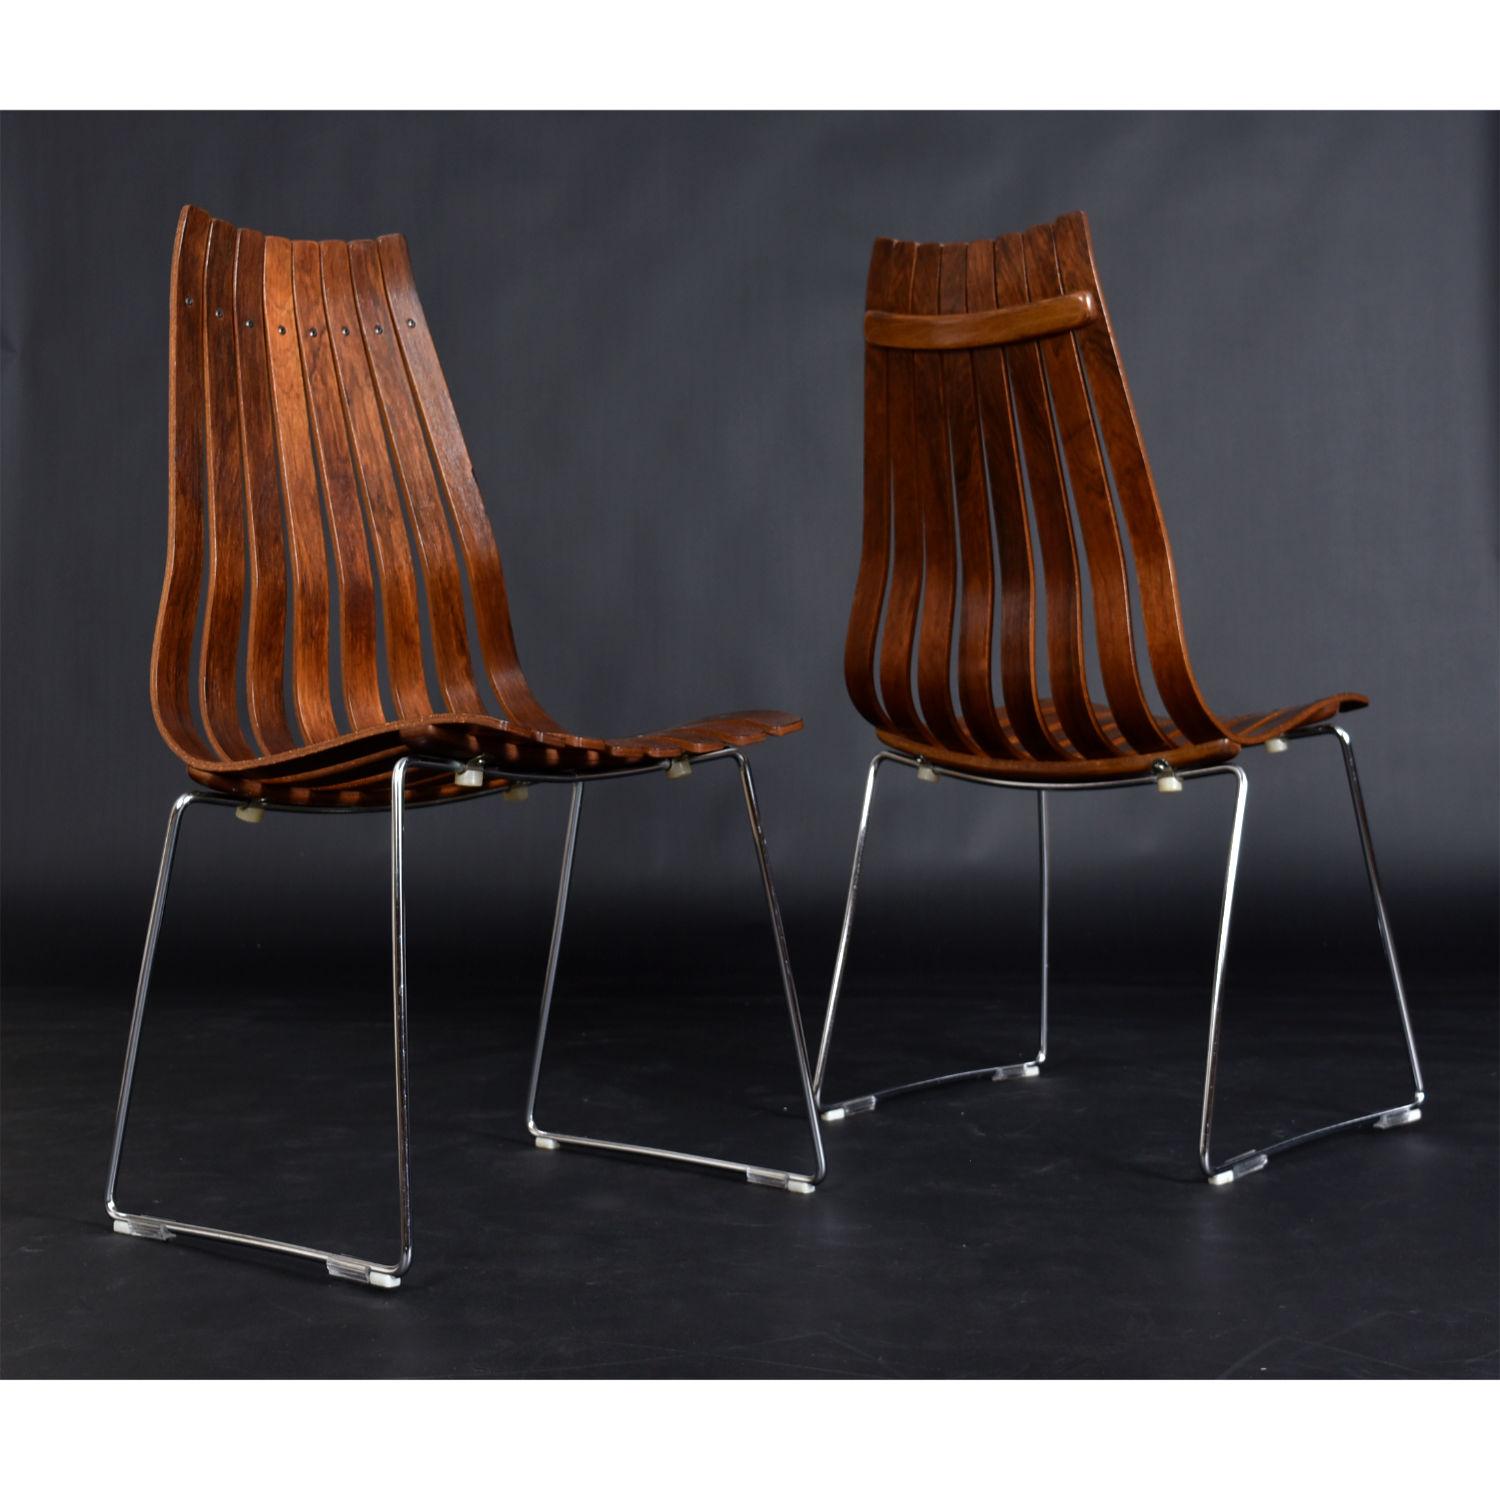 Norwegian Hans Brattrud Rosewood Scandia Dining Chairs by Hove Mobler of Norway